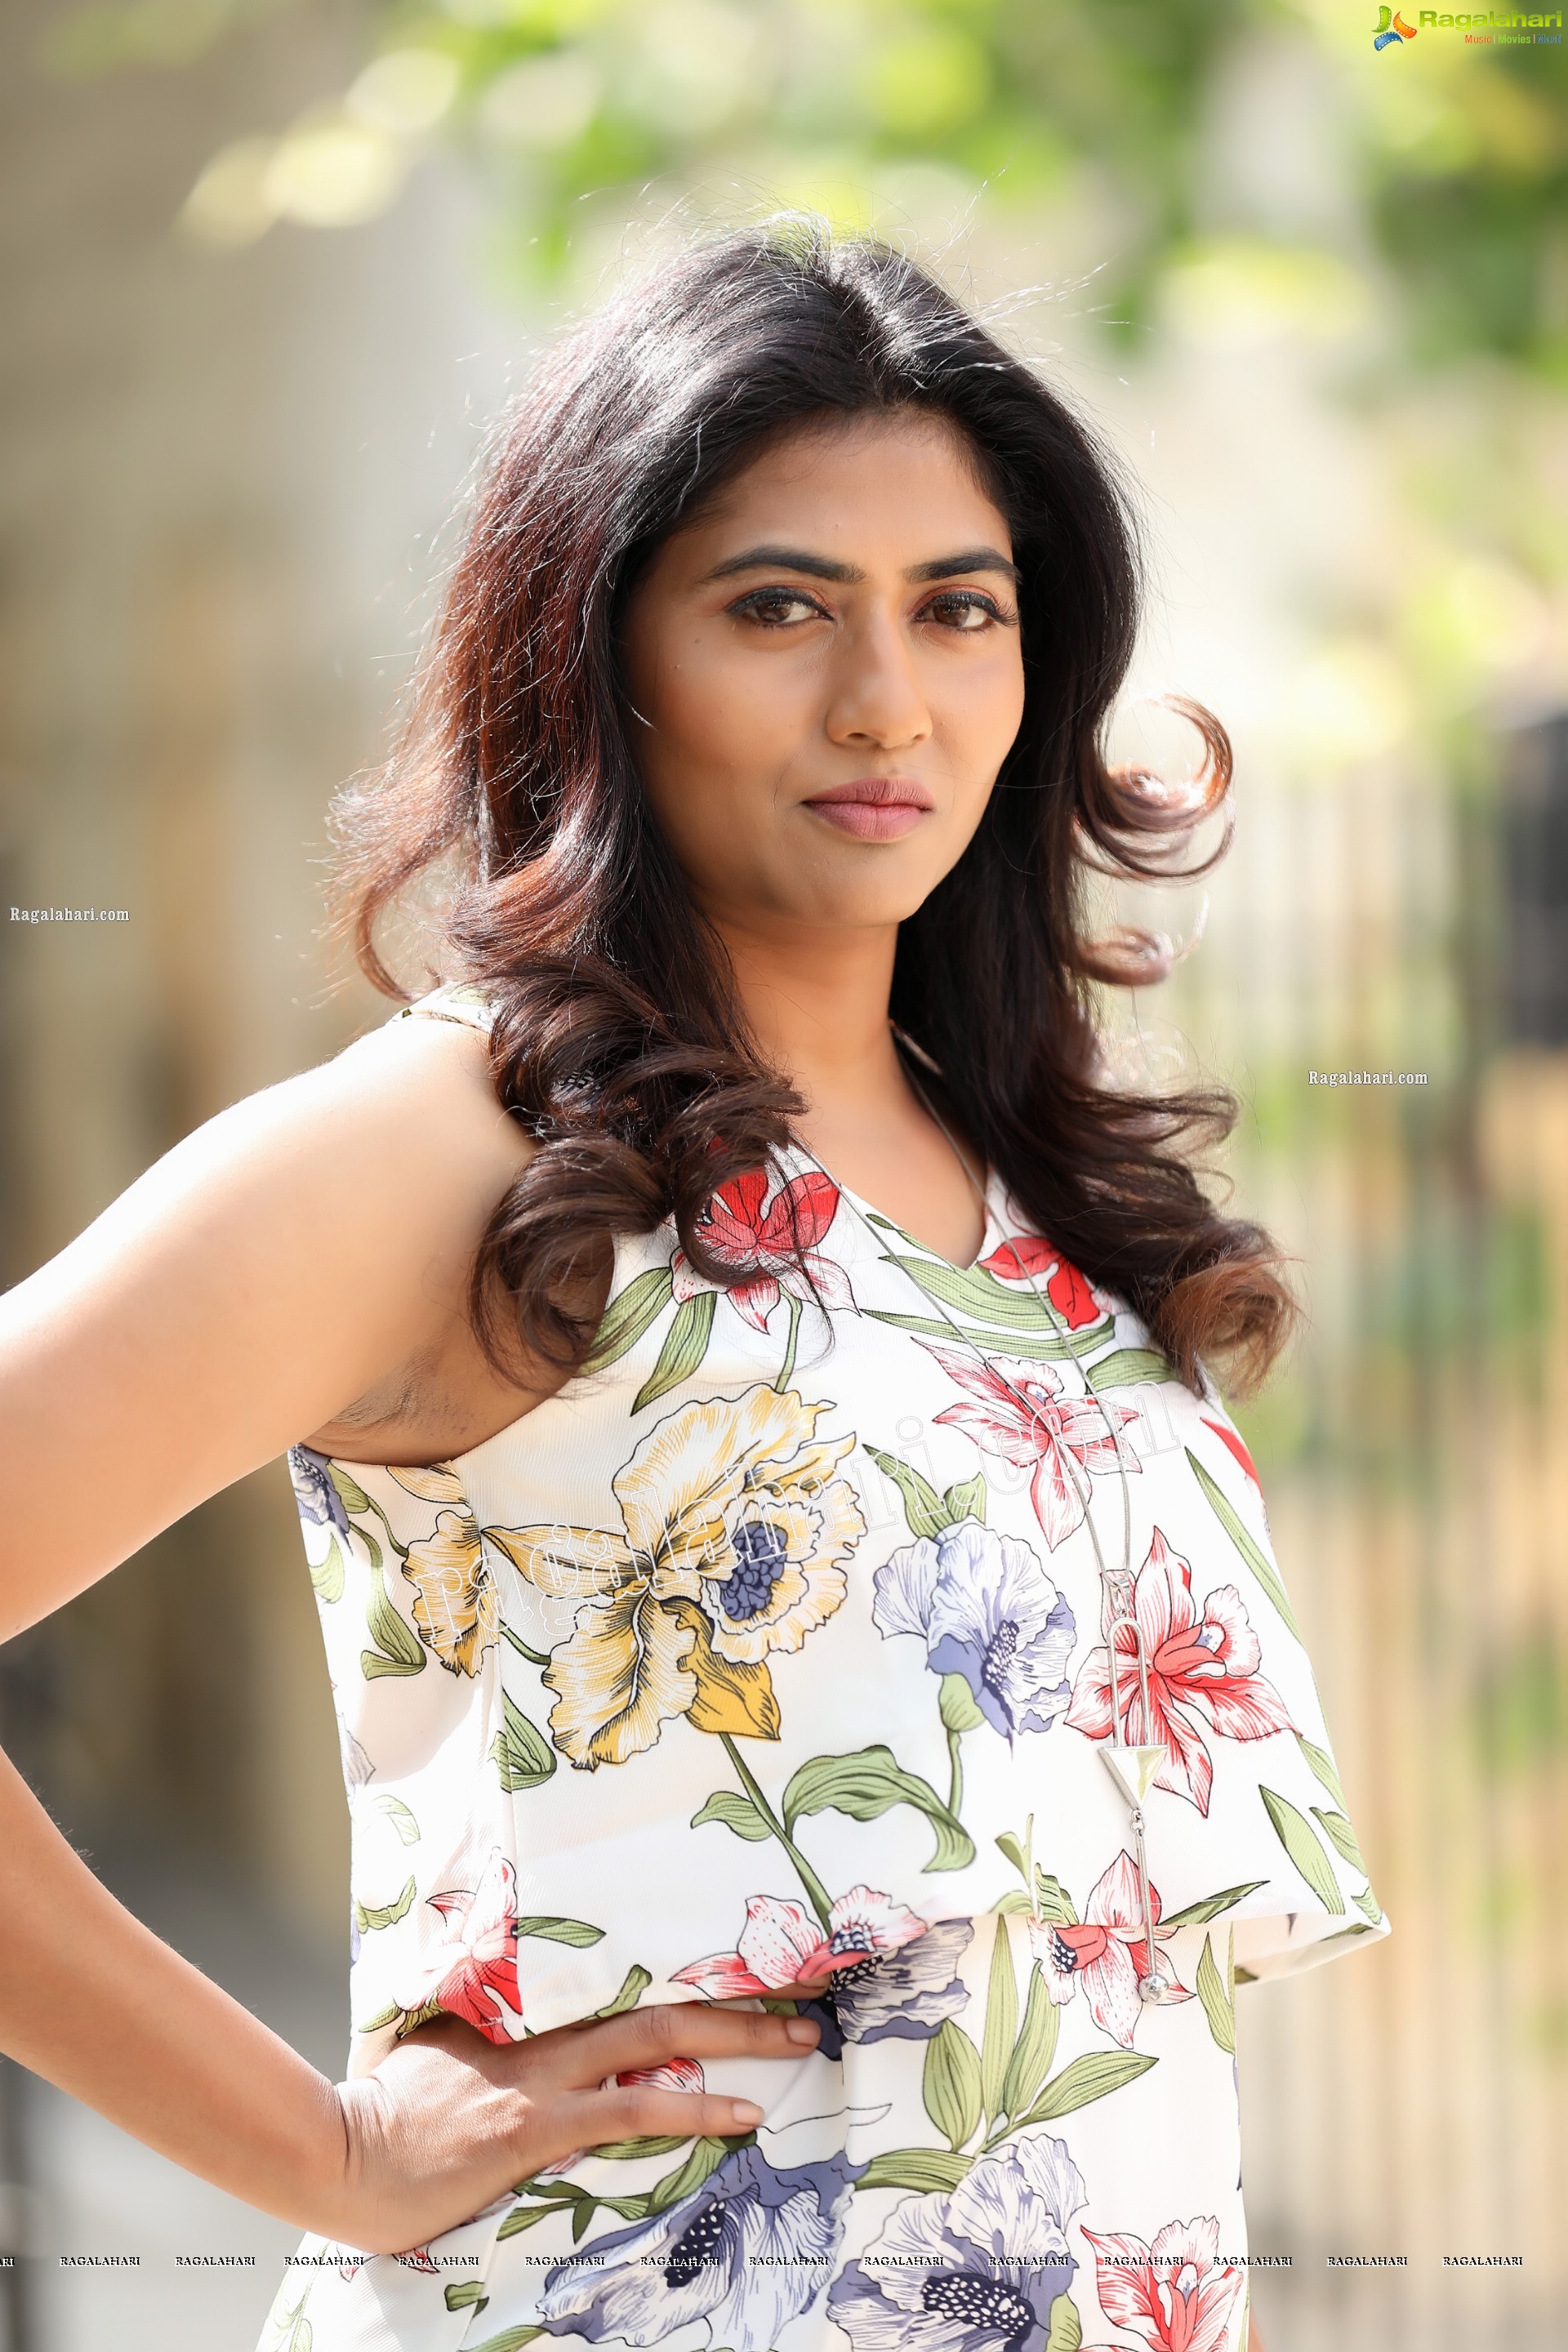 Raja Kumari YN in White Floral Printed Top and Jeans Exclusive Photo Shoot